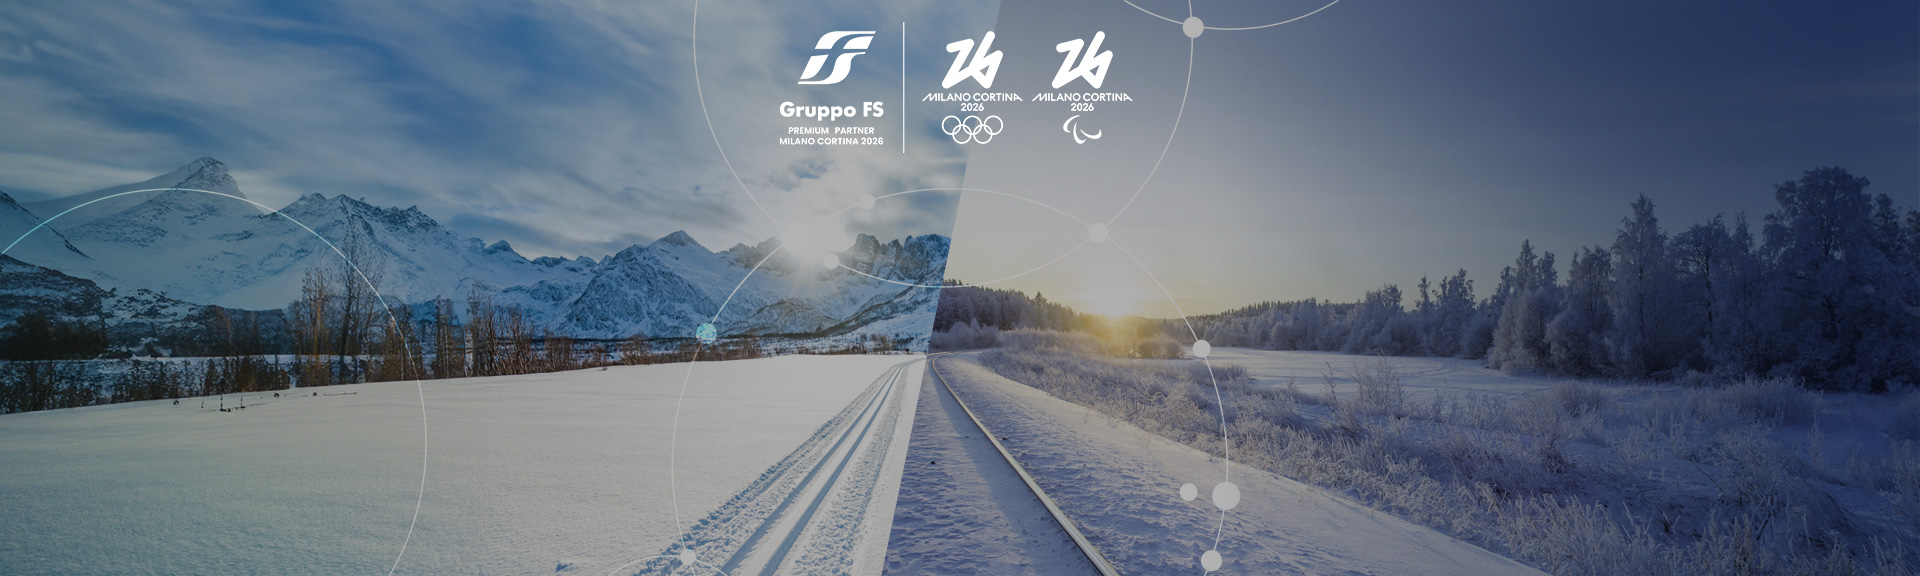 FS Group is a Premium partner of the Milan Cortina 2026 Olympic and Paralympic Winter Games